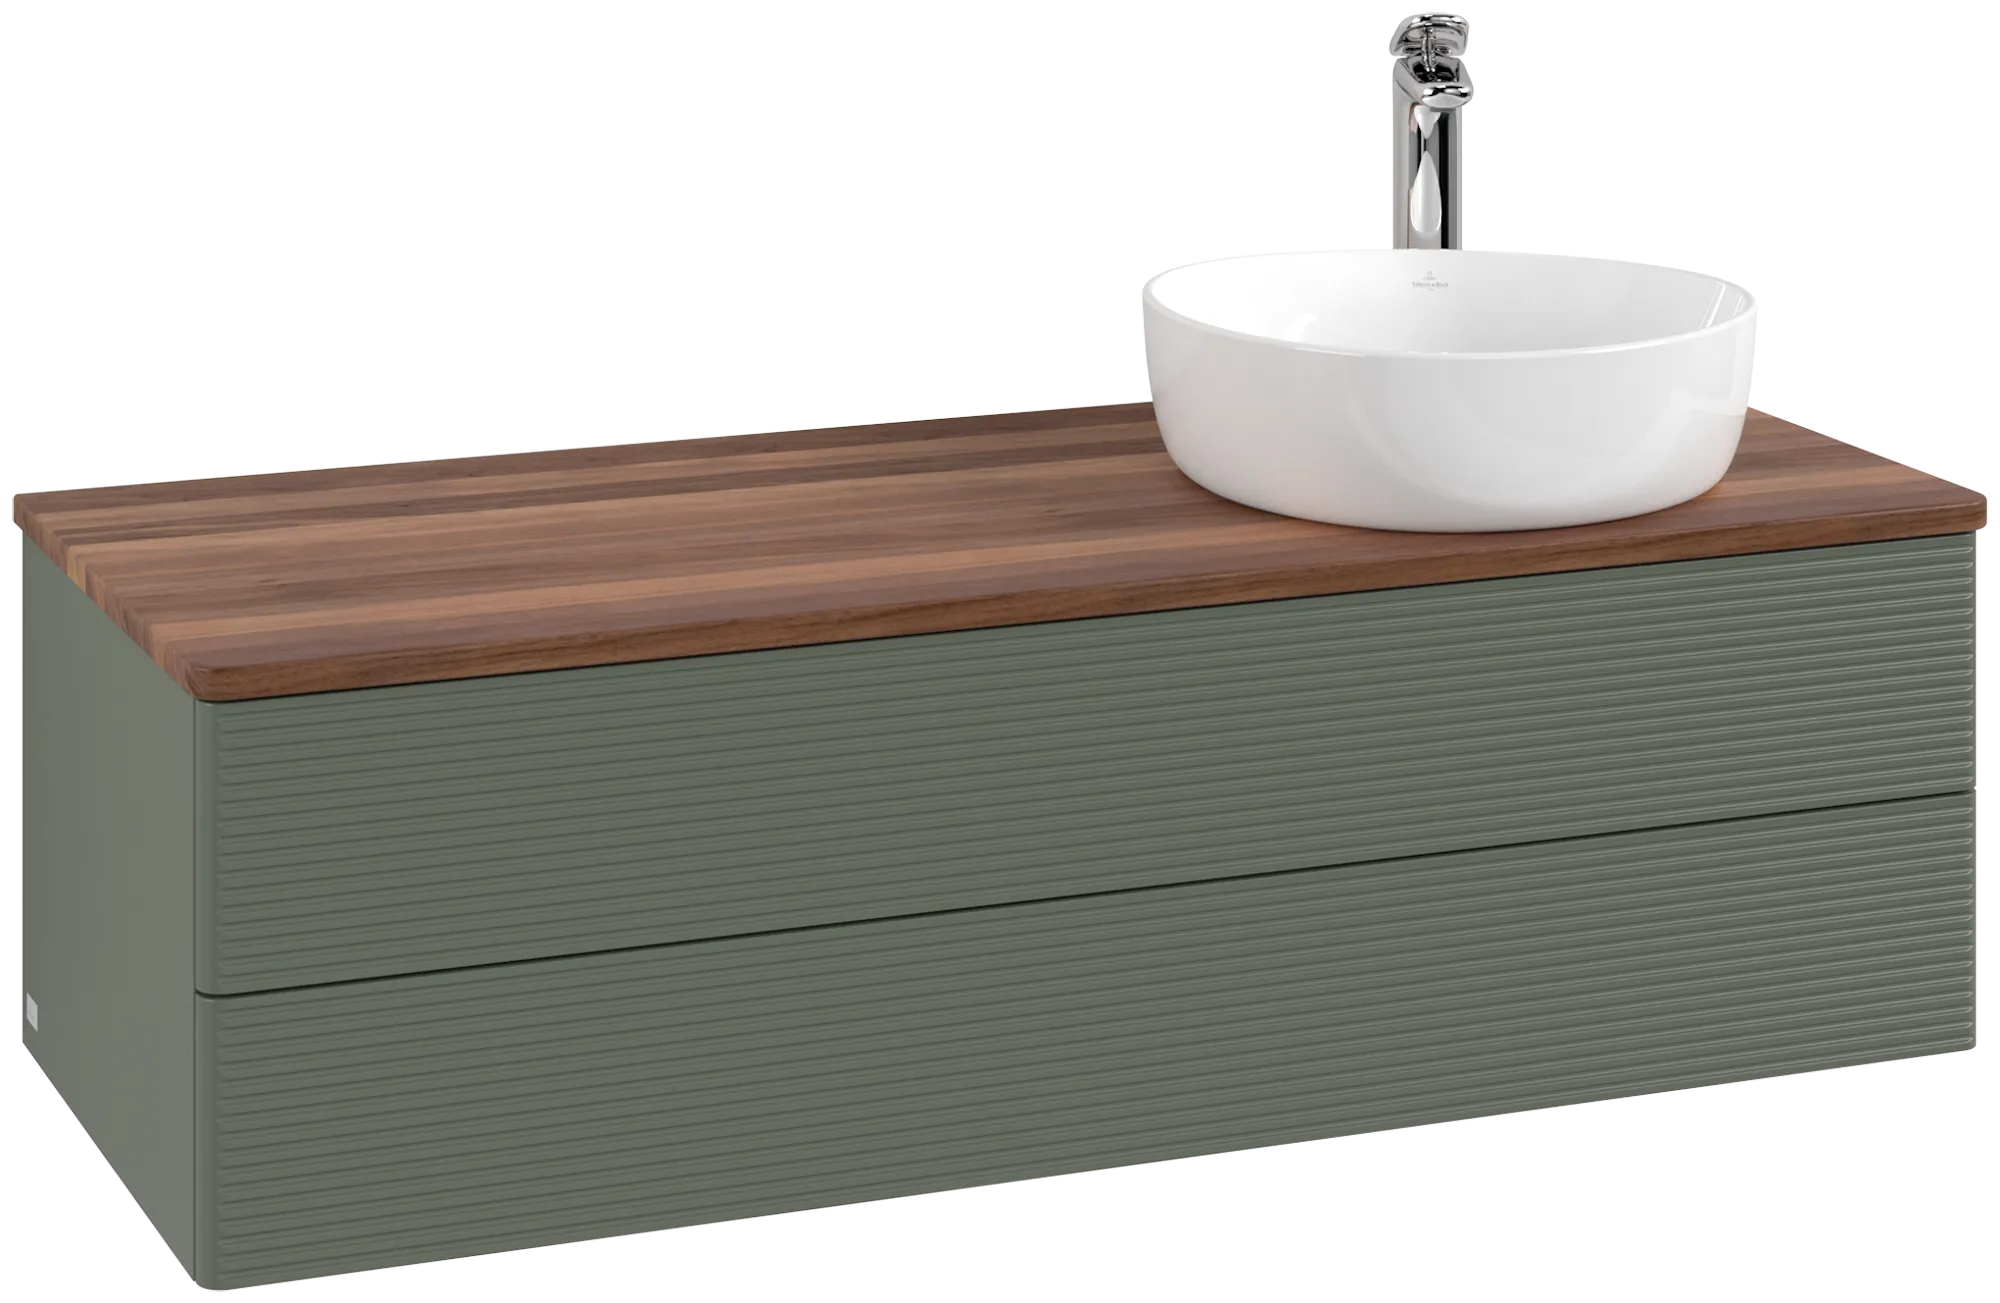 Obrázek VILLEROY BOCH Antao Vanity unit, with lighting, 2 pull-out compartments, 1200 x 360 x 500 mm, Front with grain texture, Leaf Green Matt Lacquer / Warm Walnut #L23152HL